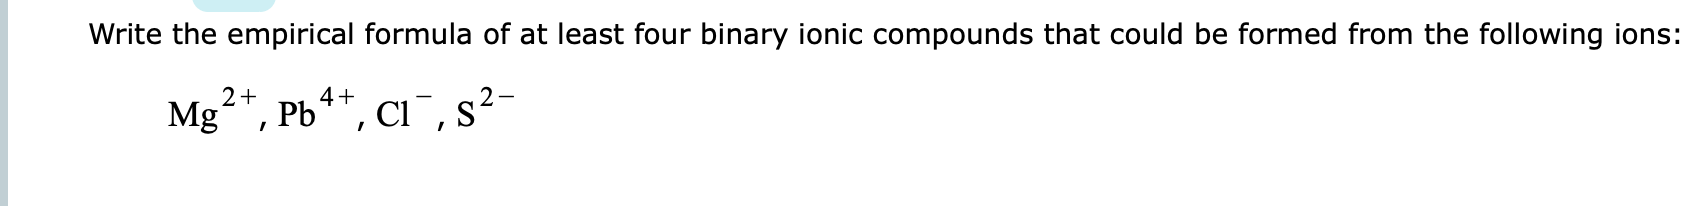 Write the empirical formula of at least four binary ionic compounds that could be formed from the following ions:
²*, Pb**, ci ¯, s²-
2+
4+
Mg
